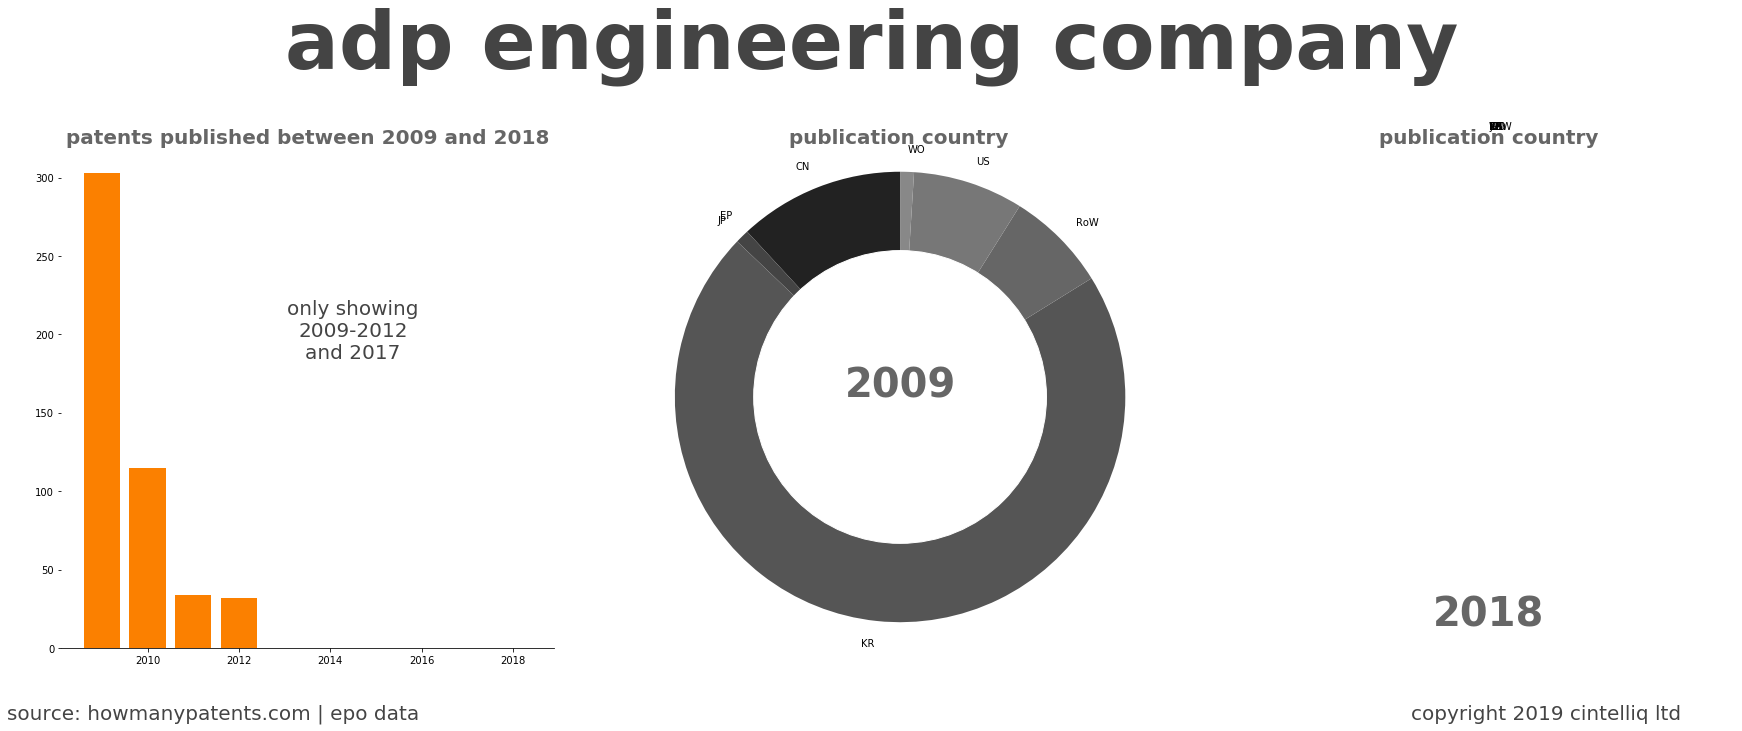 summary of patents for Adp Engineering Company